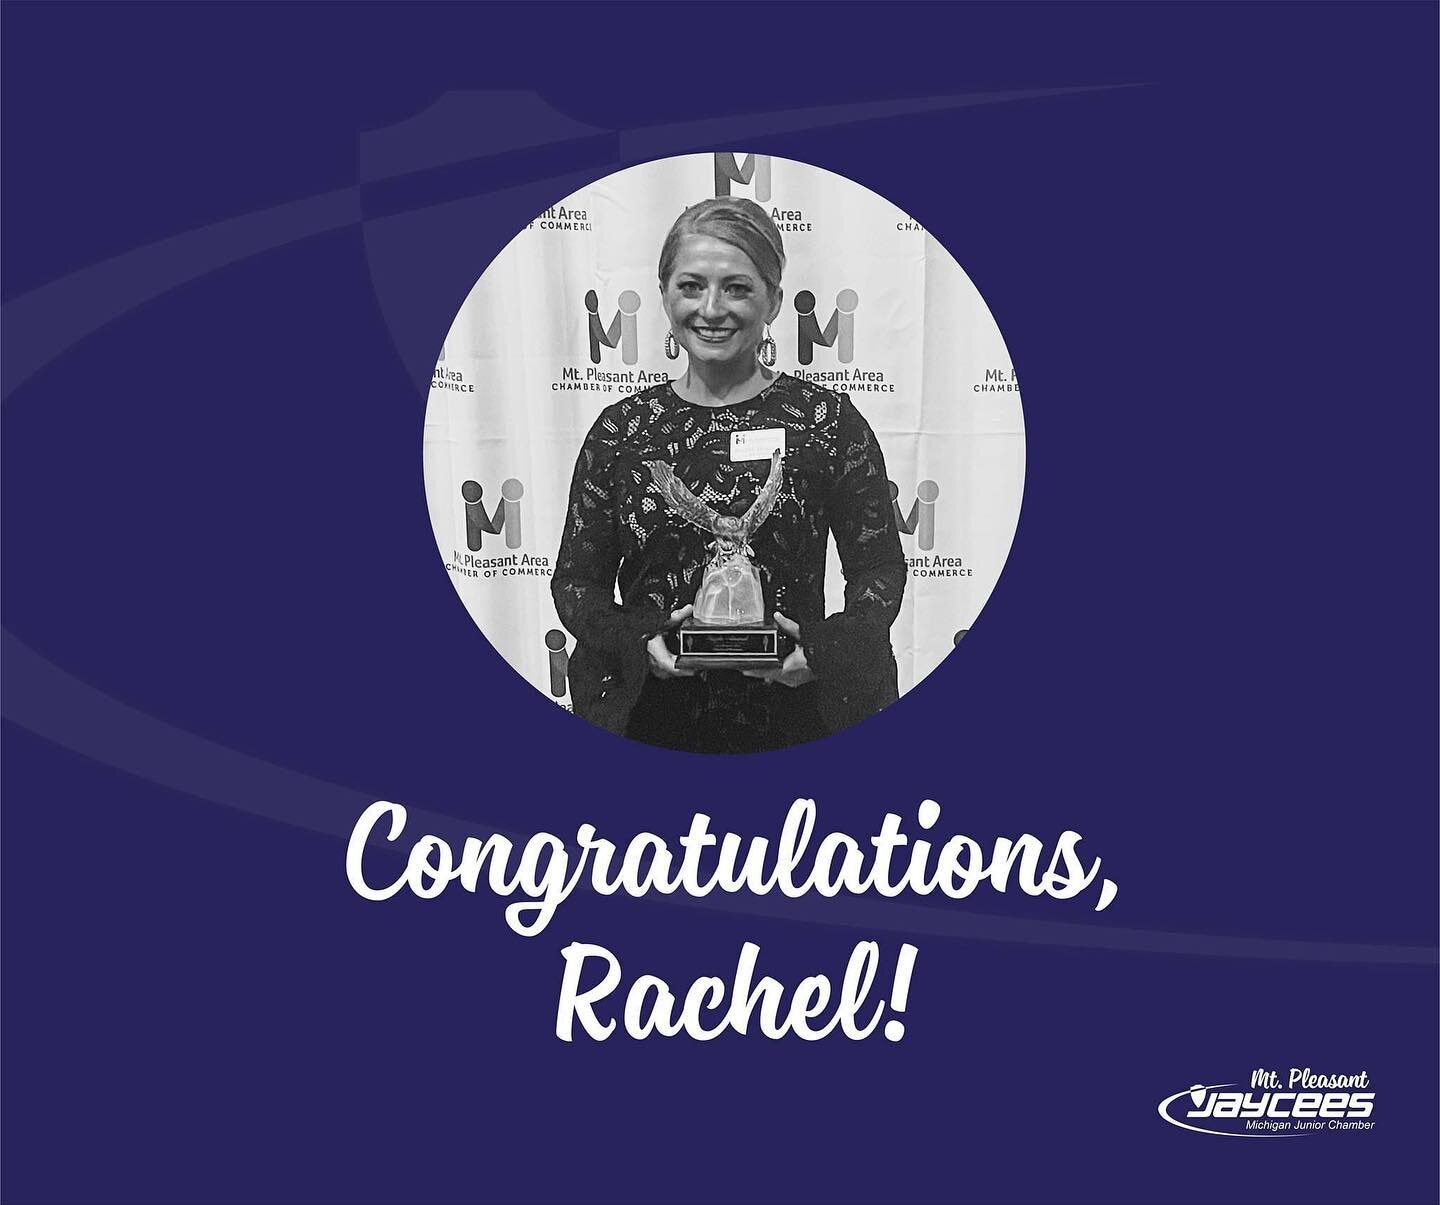 This past weekend was the Mt. Pleasant Area Chamber of Commerce 64th Annual Awards Banquet! The 2021 Mt. Pleasant Jaycees Eagle Award went to Rachel Blizzard. Congratulations Rachel and to all of the award winners who continue to make a difference in